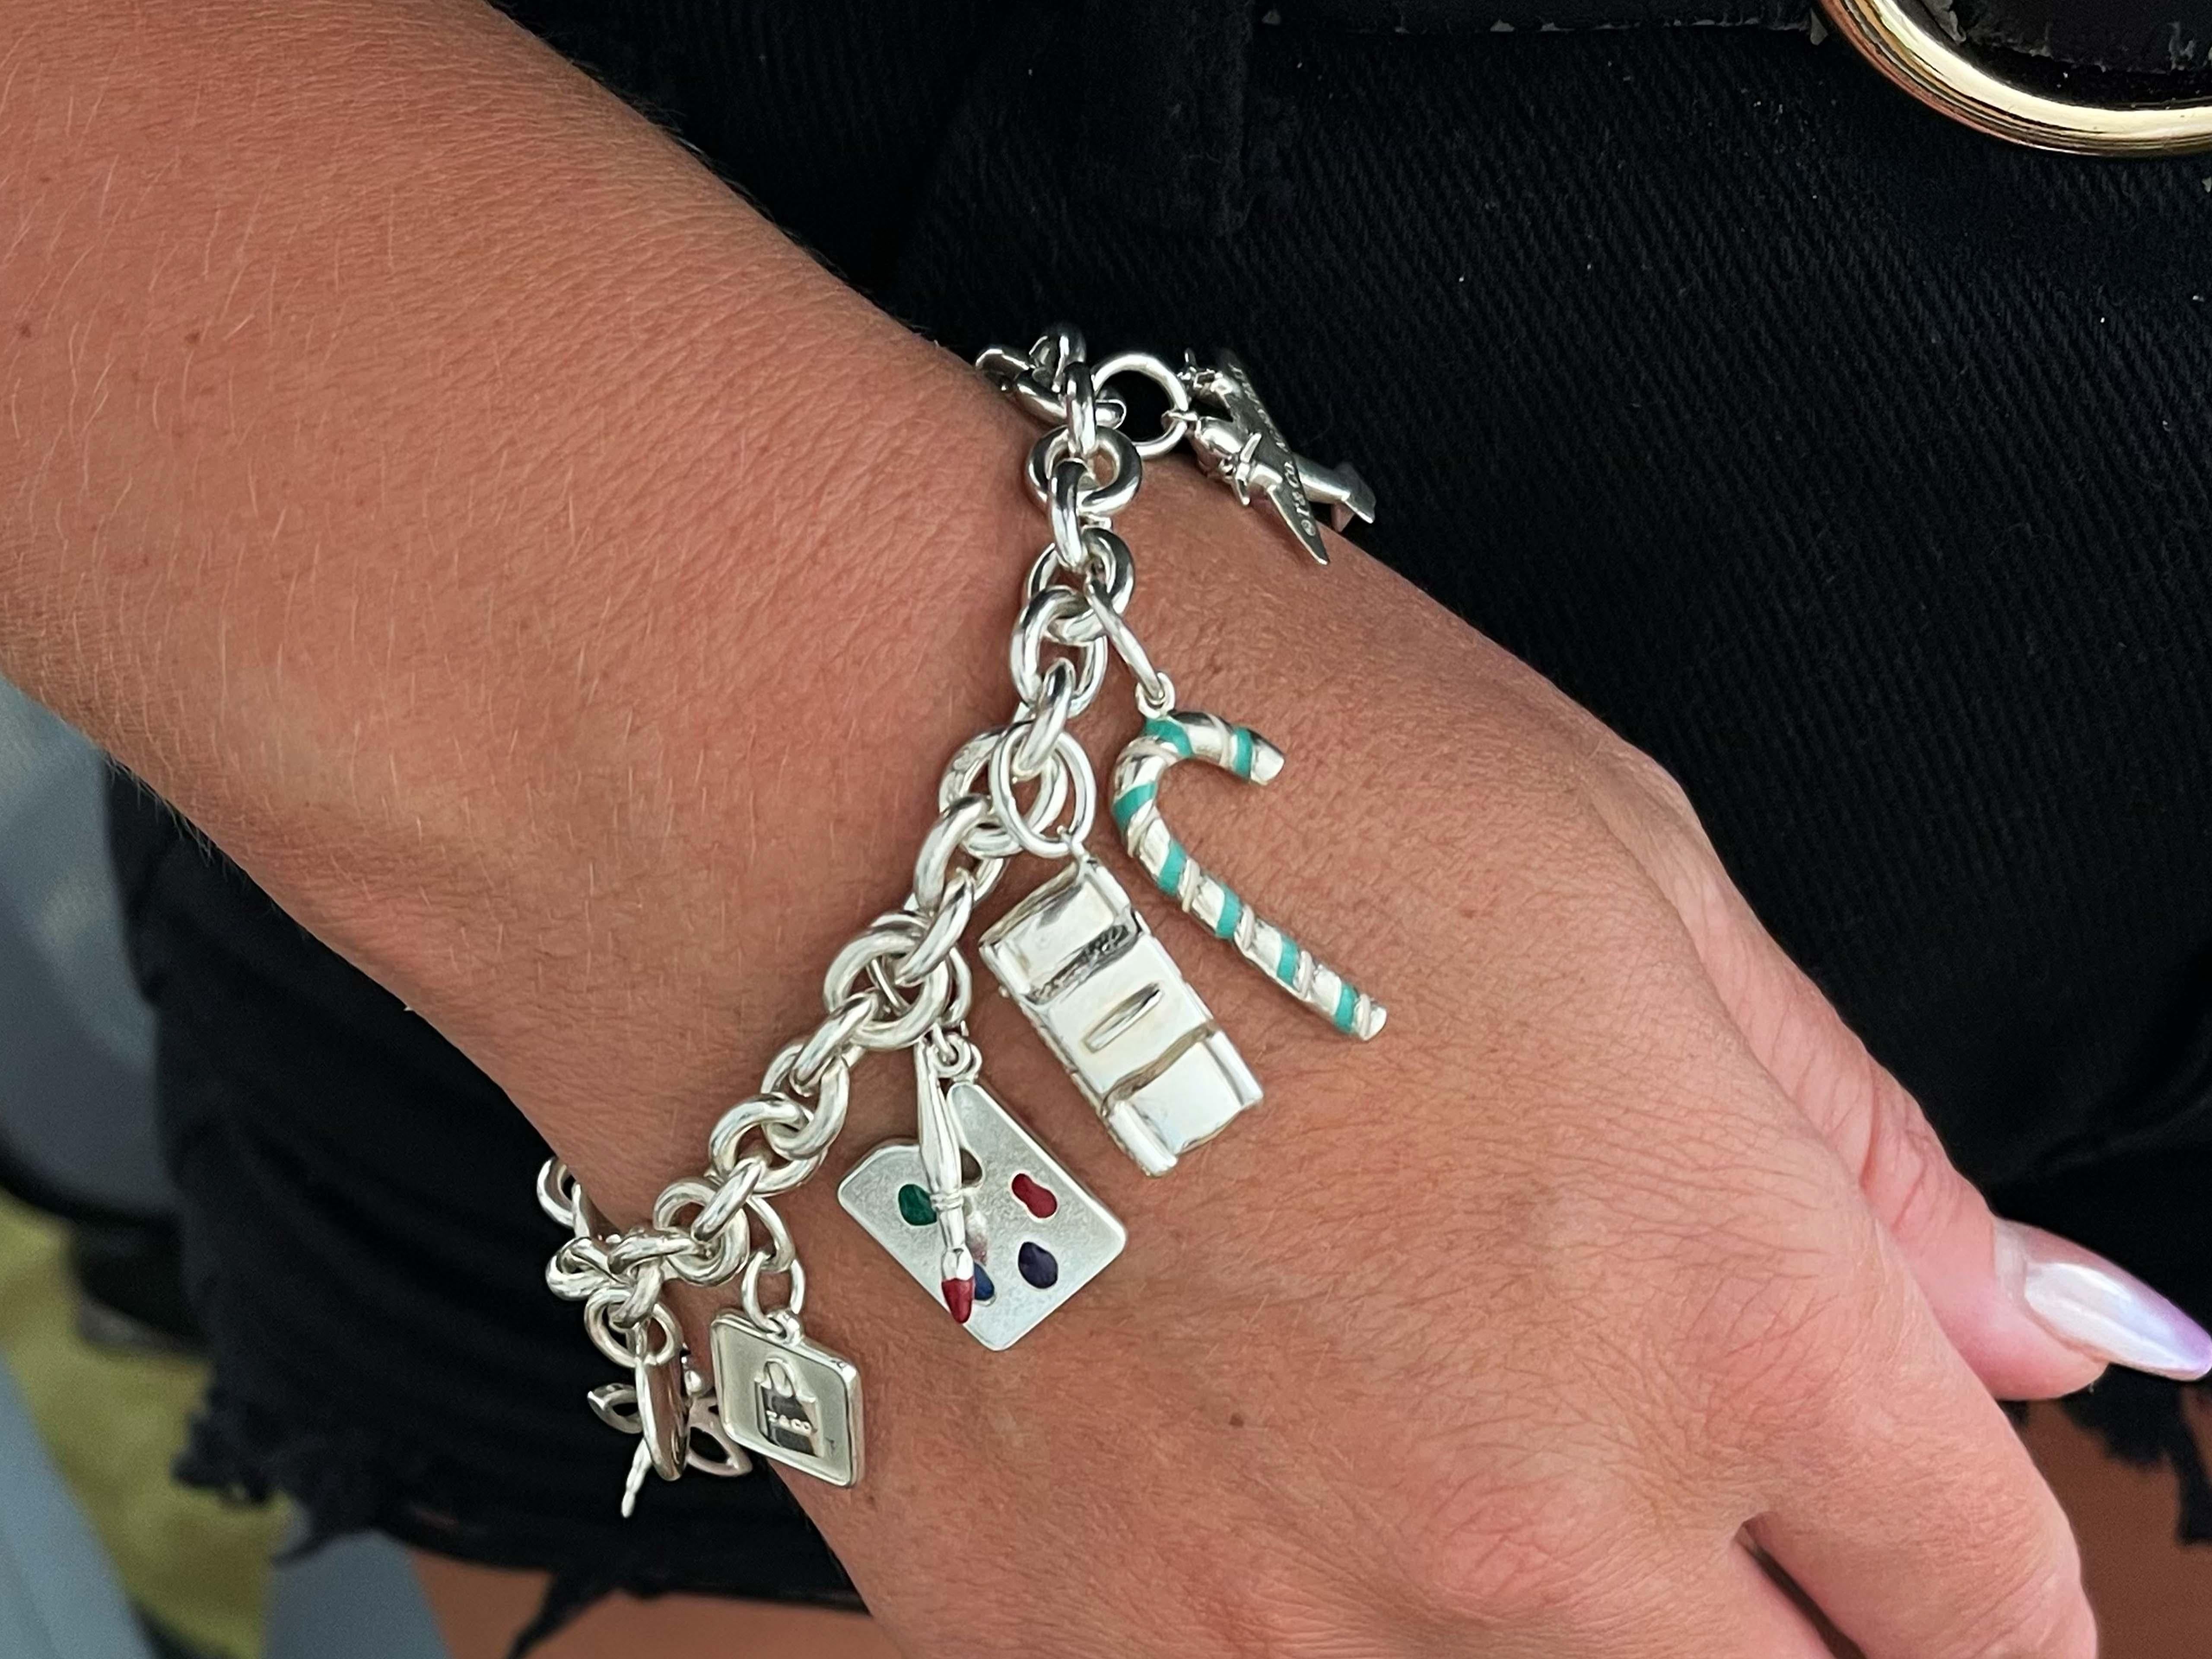 This one of a kind Tiffany bracelet is extremely rare and features rare charms some of which are unavailable on the market including the art palette charm.
​
​Item Specifications:

Brand: Tiffany & Co.

Metal: Sterling Silver

Metal Purity: AG 925